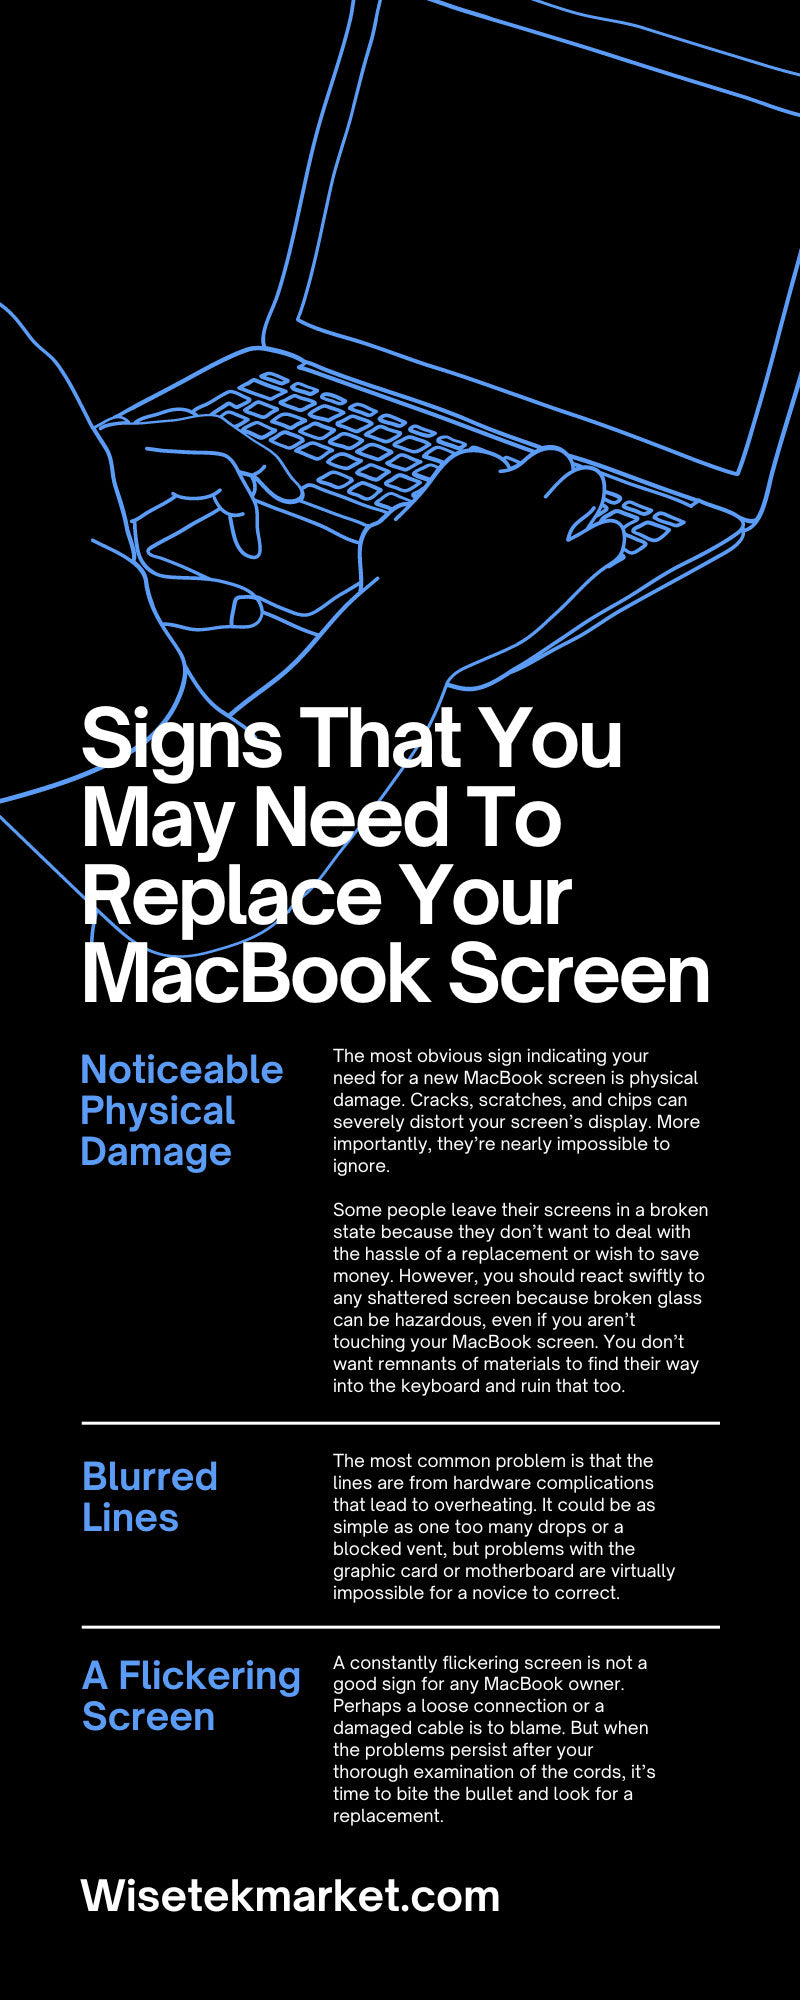 Signs That You May Need To Replace Your MacBook Screen